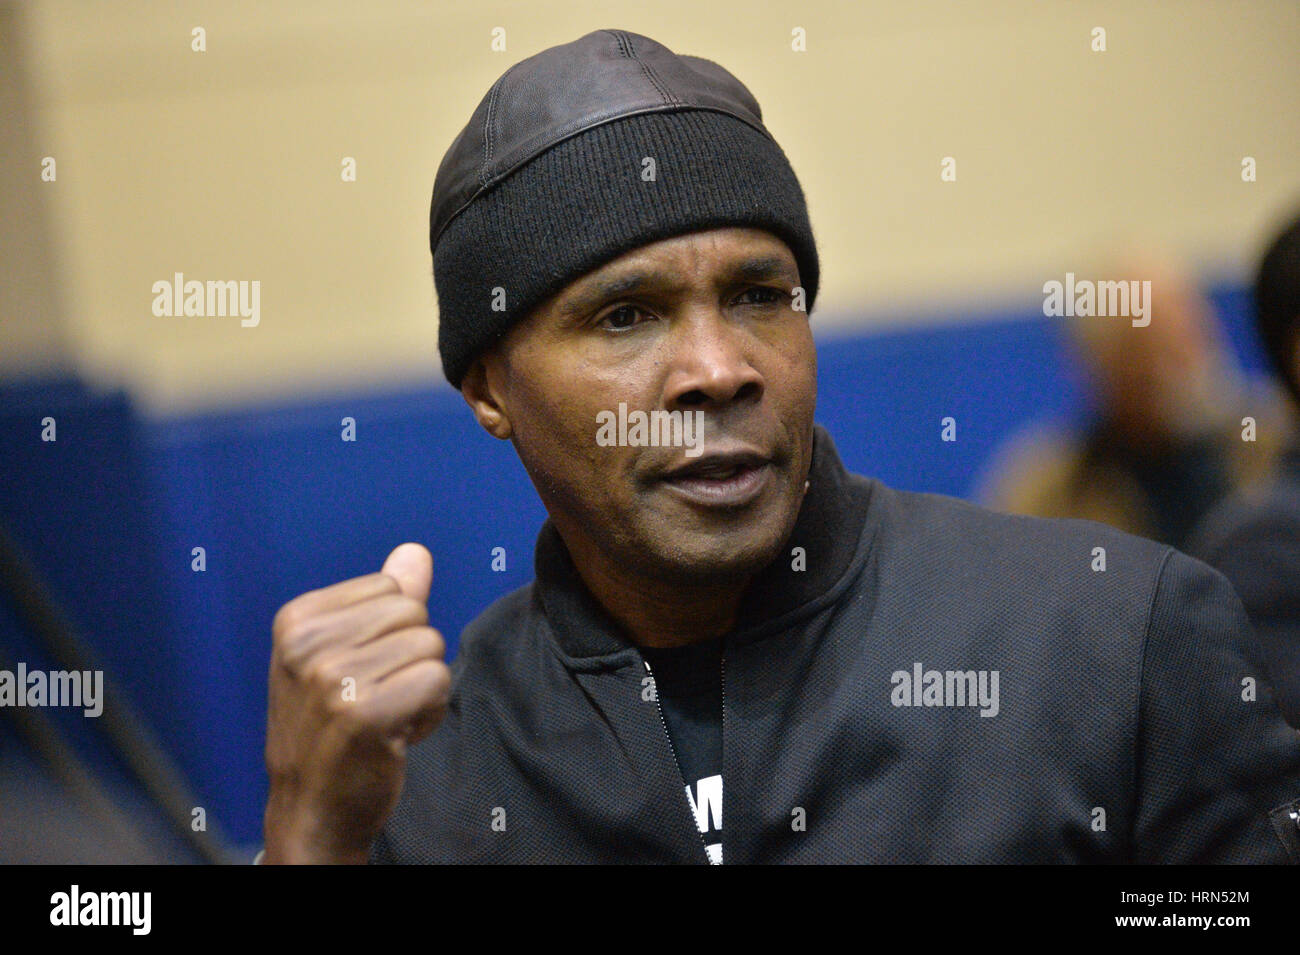 New York, USA, 03 Mar 2017- Sugar Ray Leonard attend the official weigh-in for boxers Keith Thurman and Danny Garcia before their welterweight championship fight on March 4, 2017 at the Barclay's Center in Brooklyn, New York. credit: Erik Pendzich Credit: Erik Pendzich/Alamy Live News Stock Photo